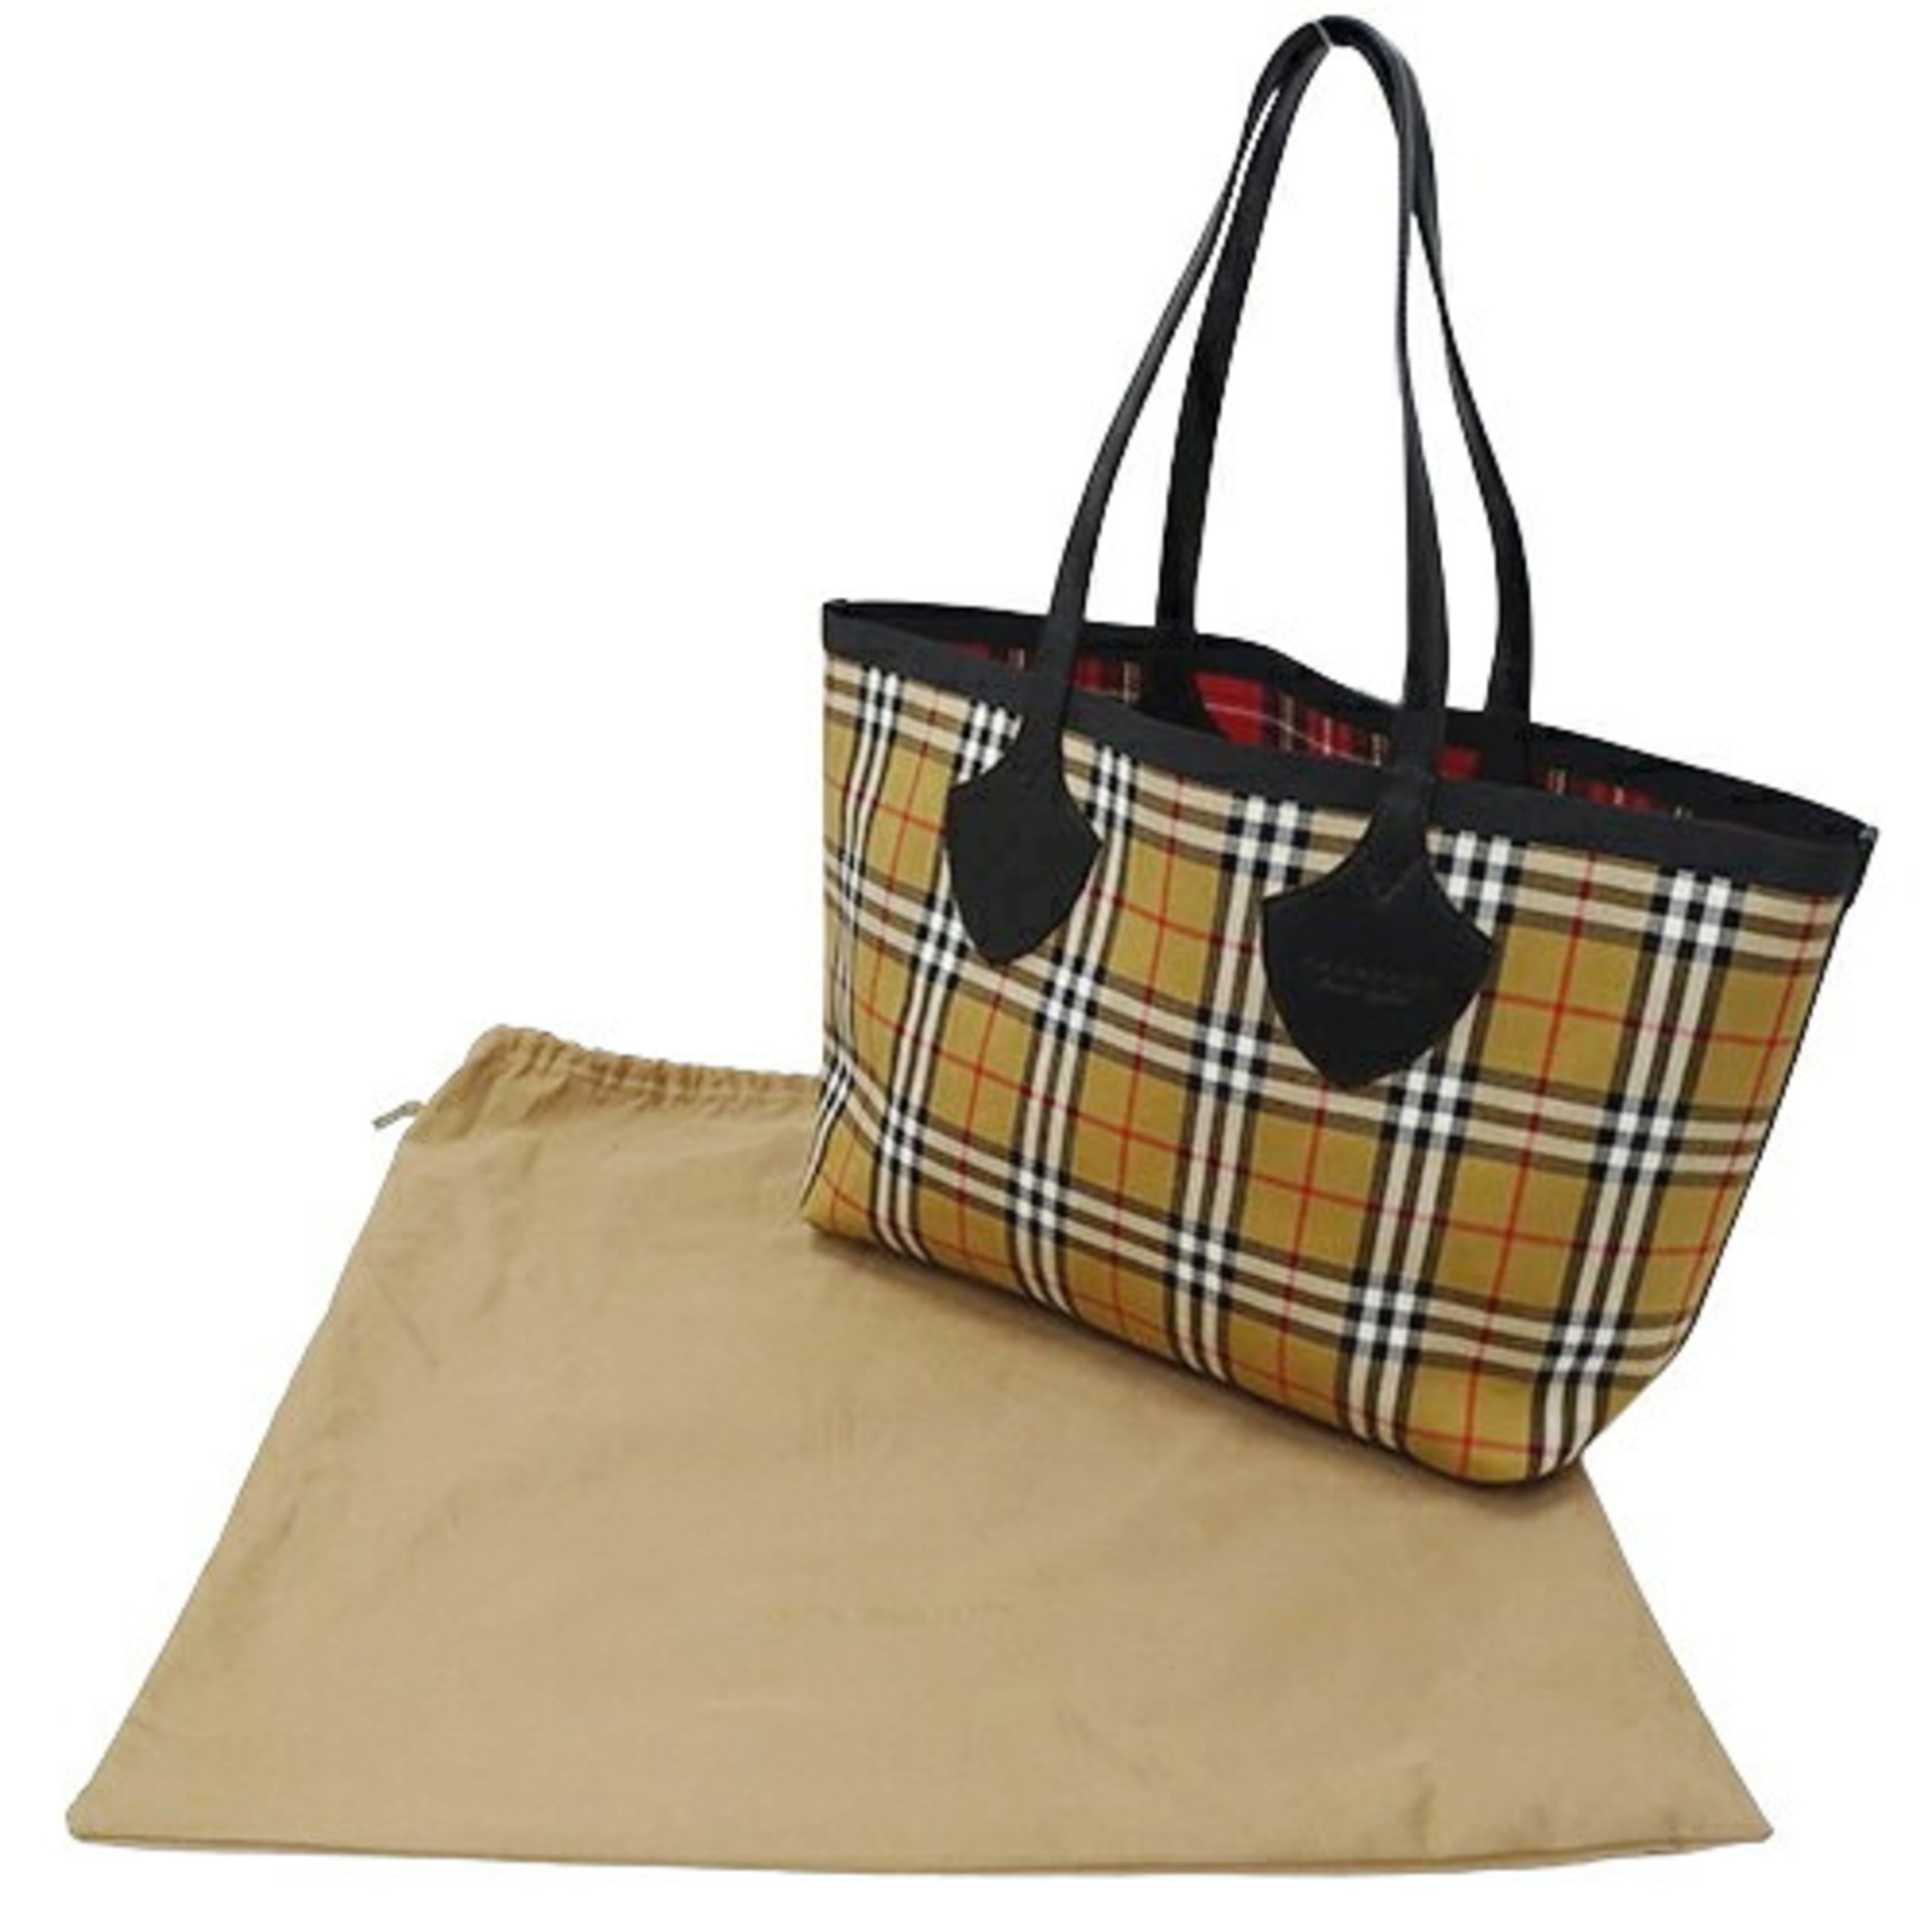 Burberry BURBERRY bag ladies brand tote reversible canvas beige red 4069796 check